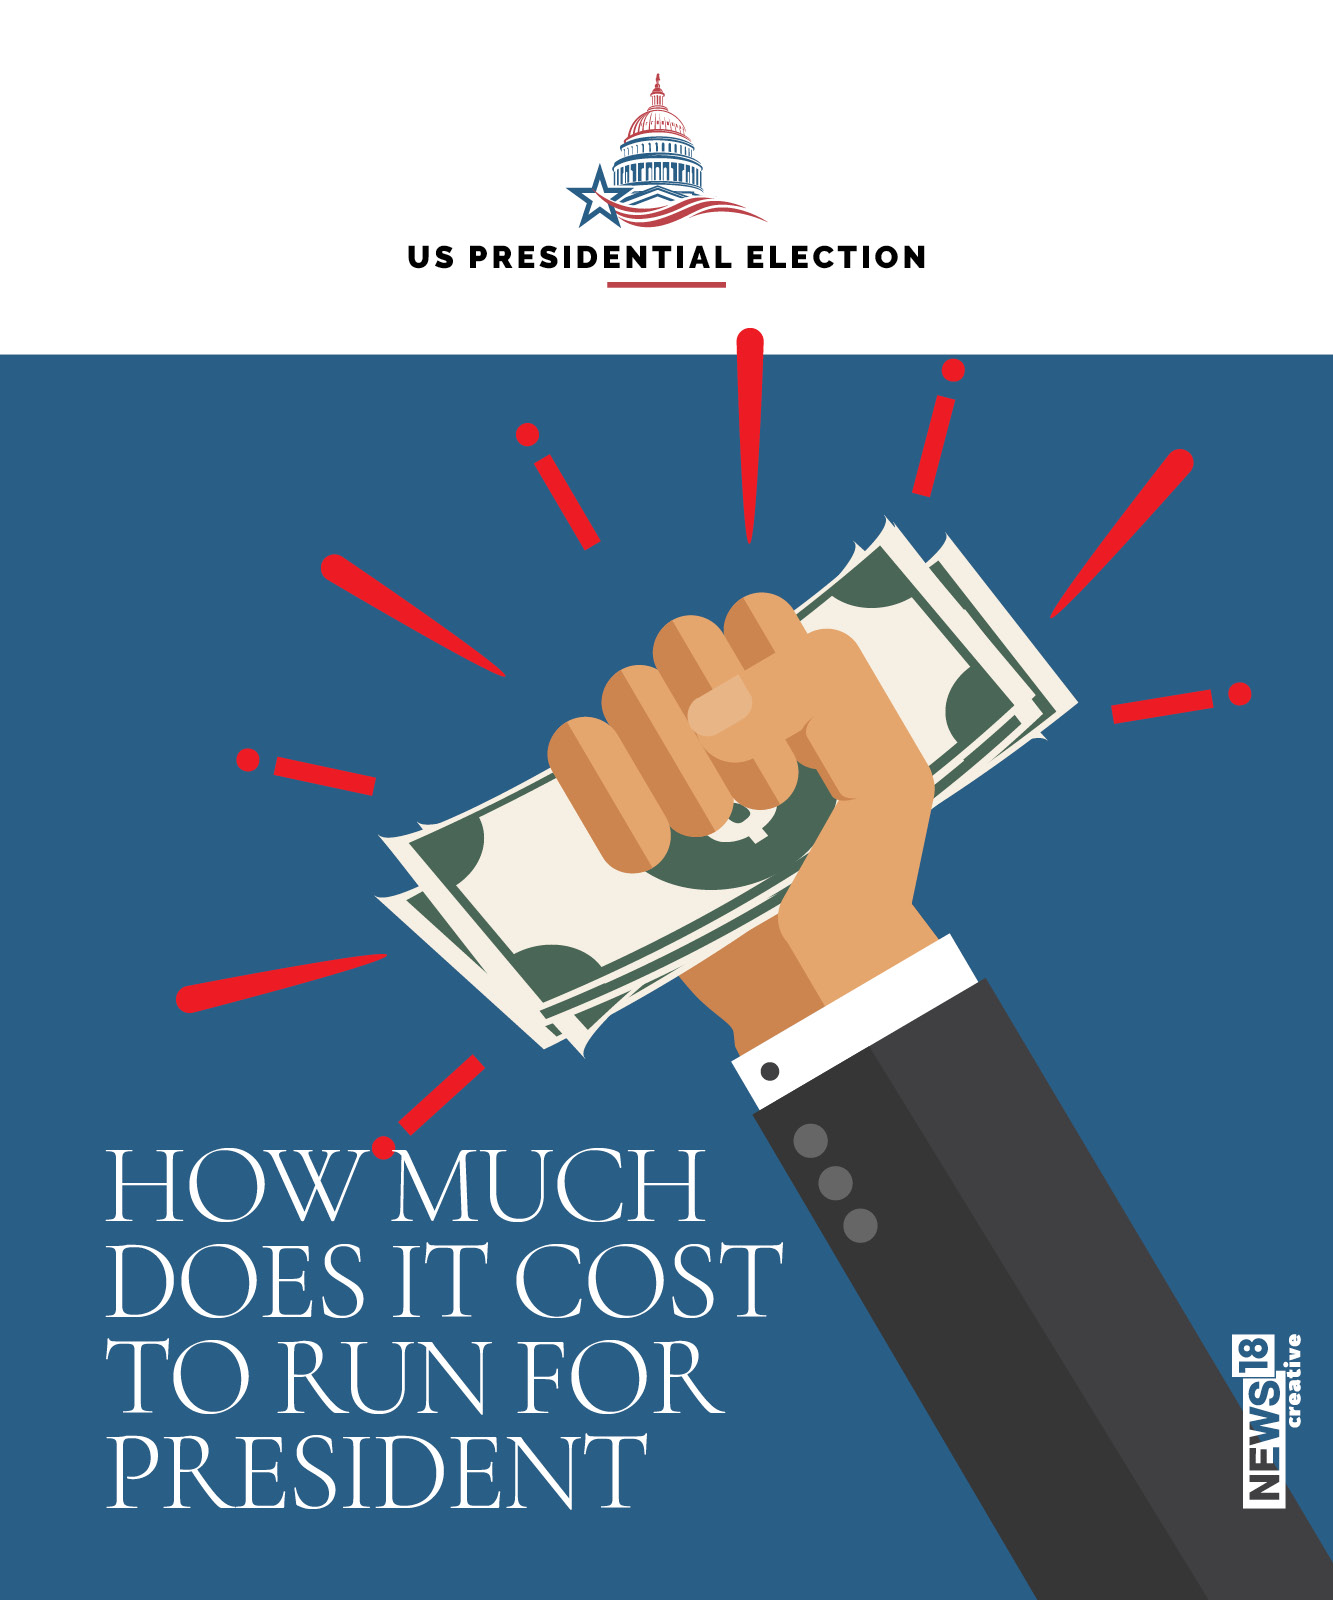 How much does it cost to run for US President?